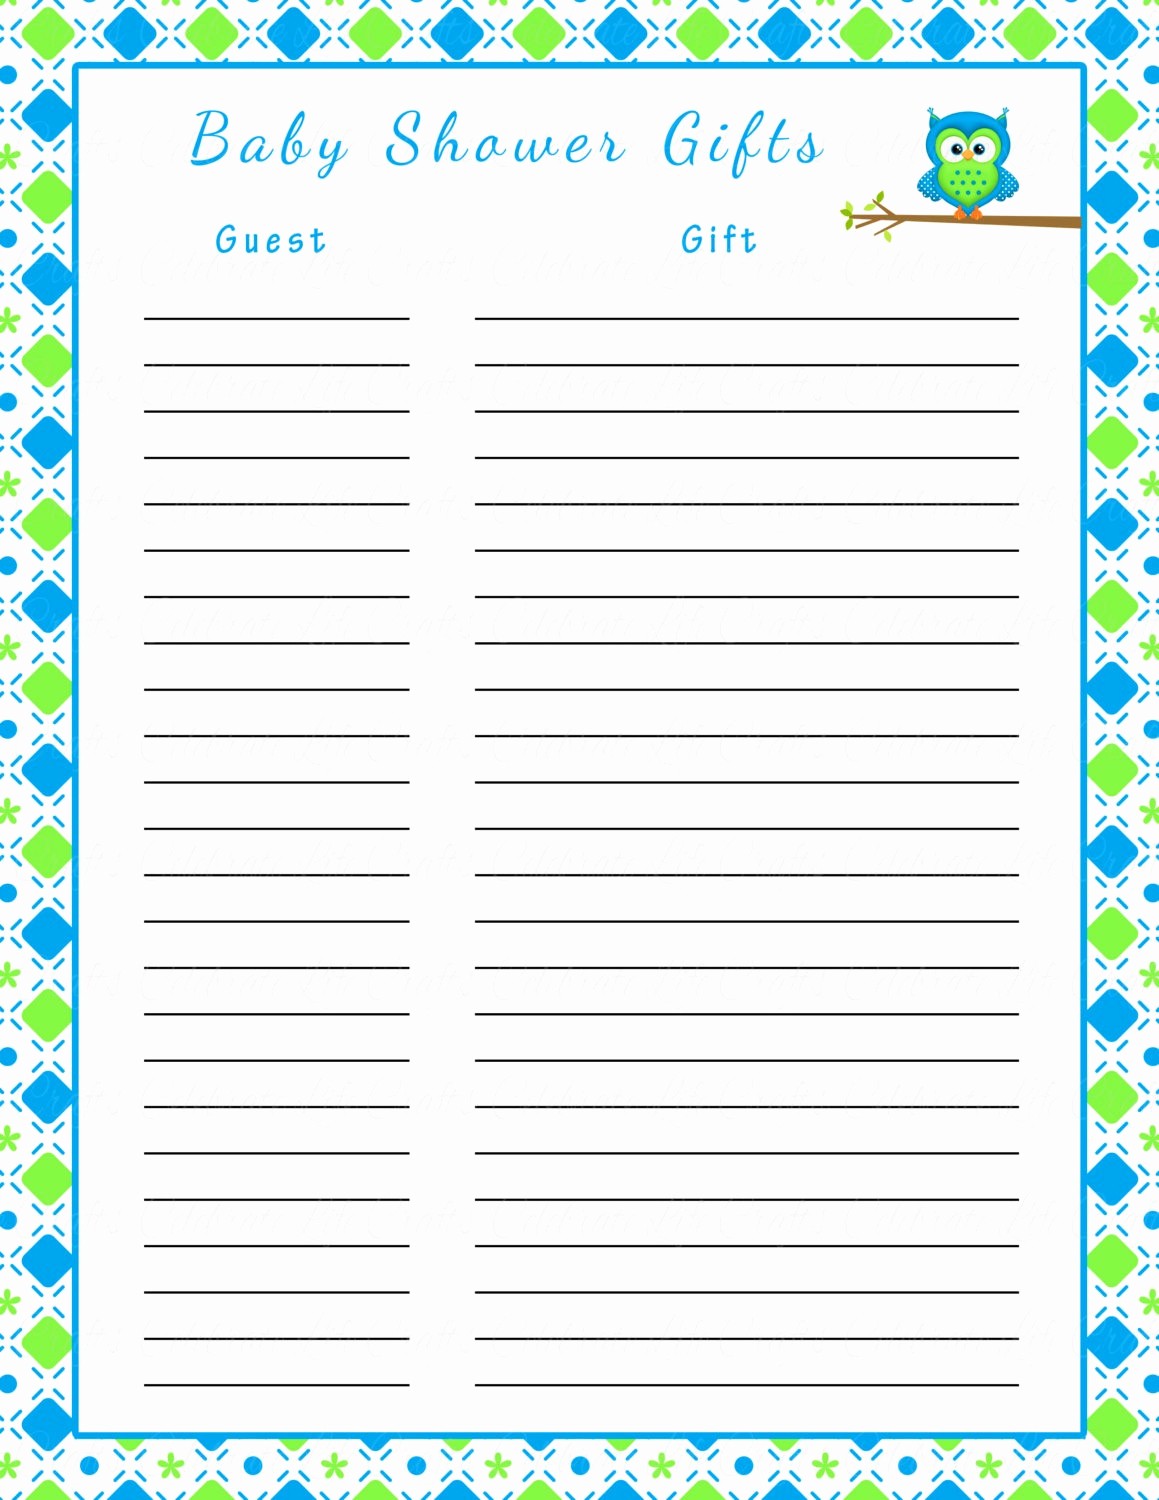 Baby Shower Invitation List Template Best Of Printable Baby Shower Gift List Template Gifts Gifts Mughals